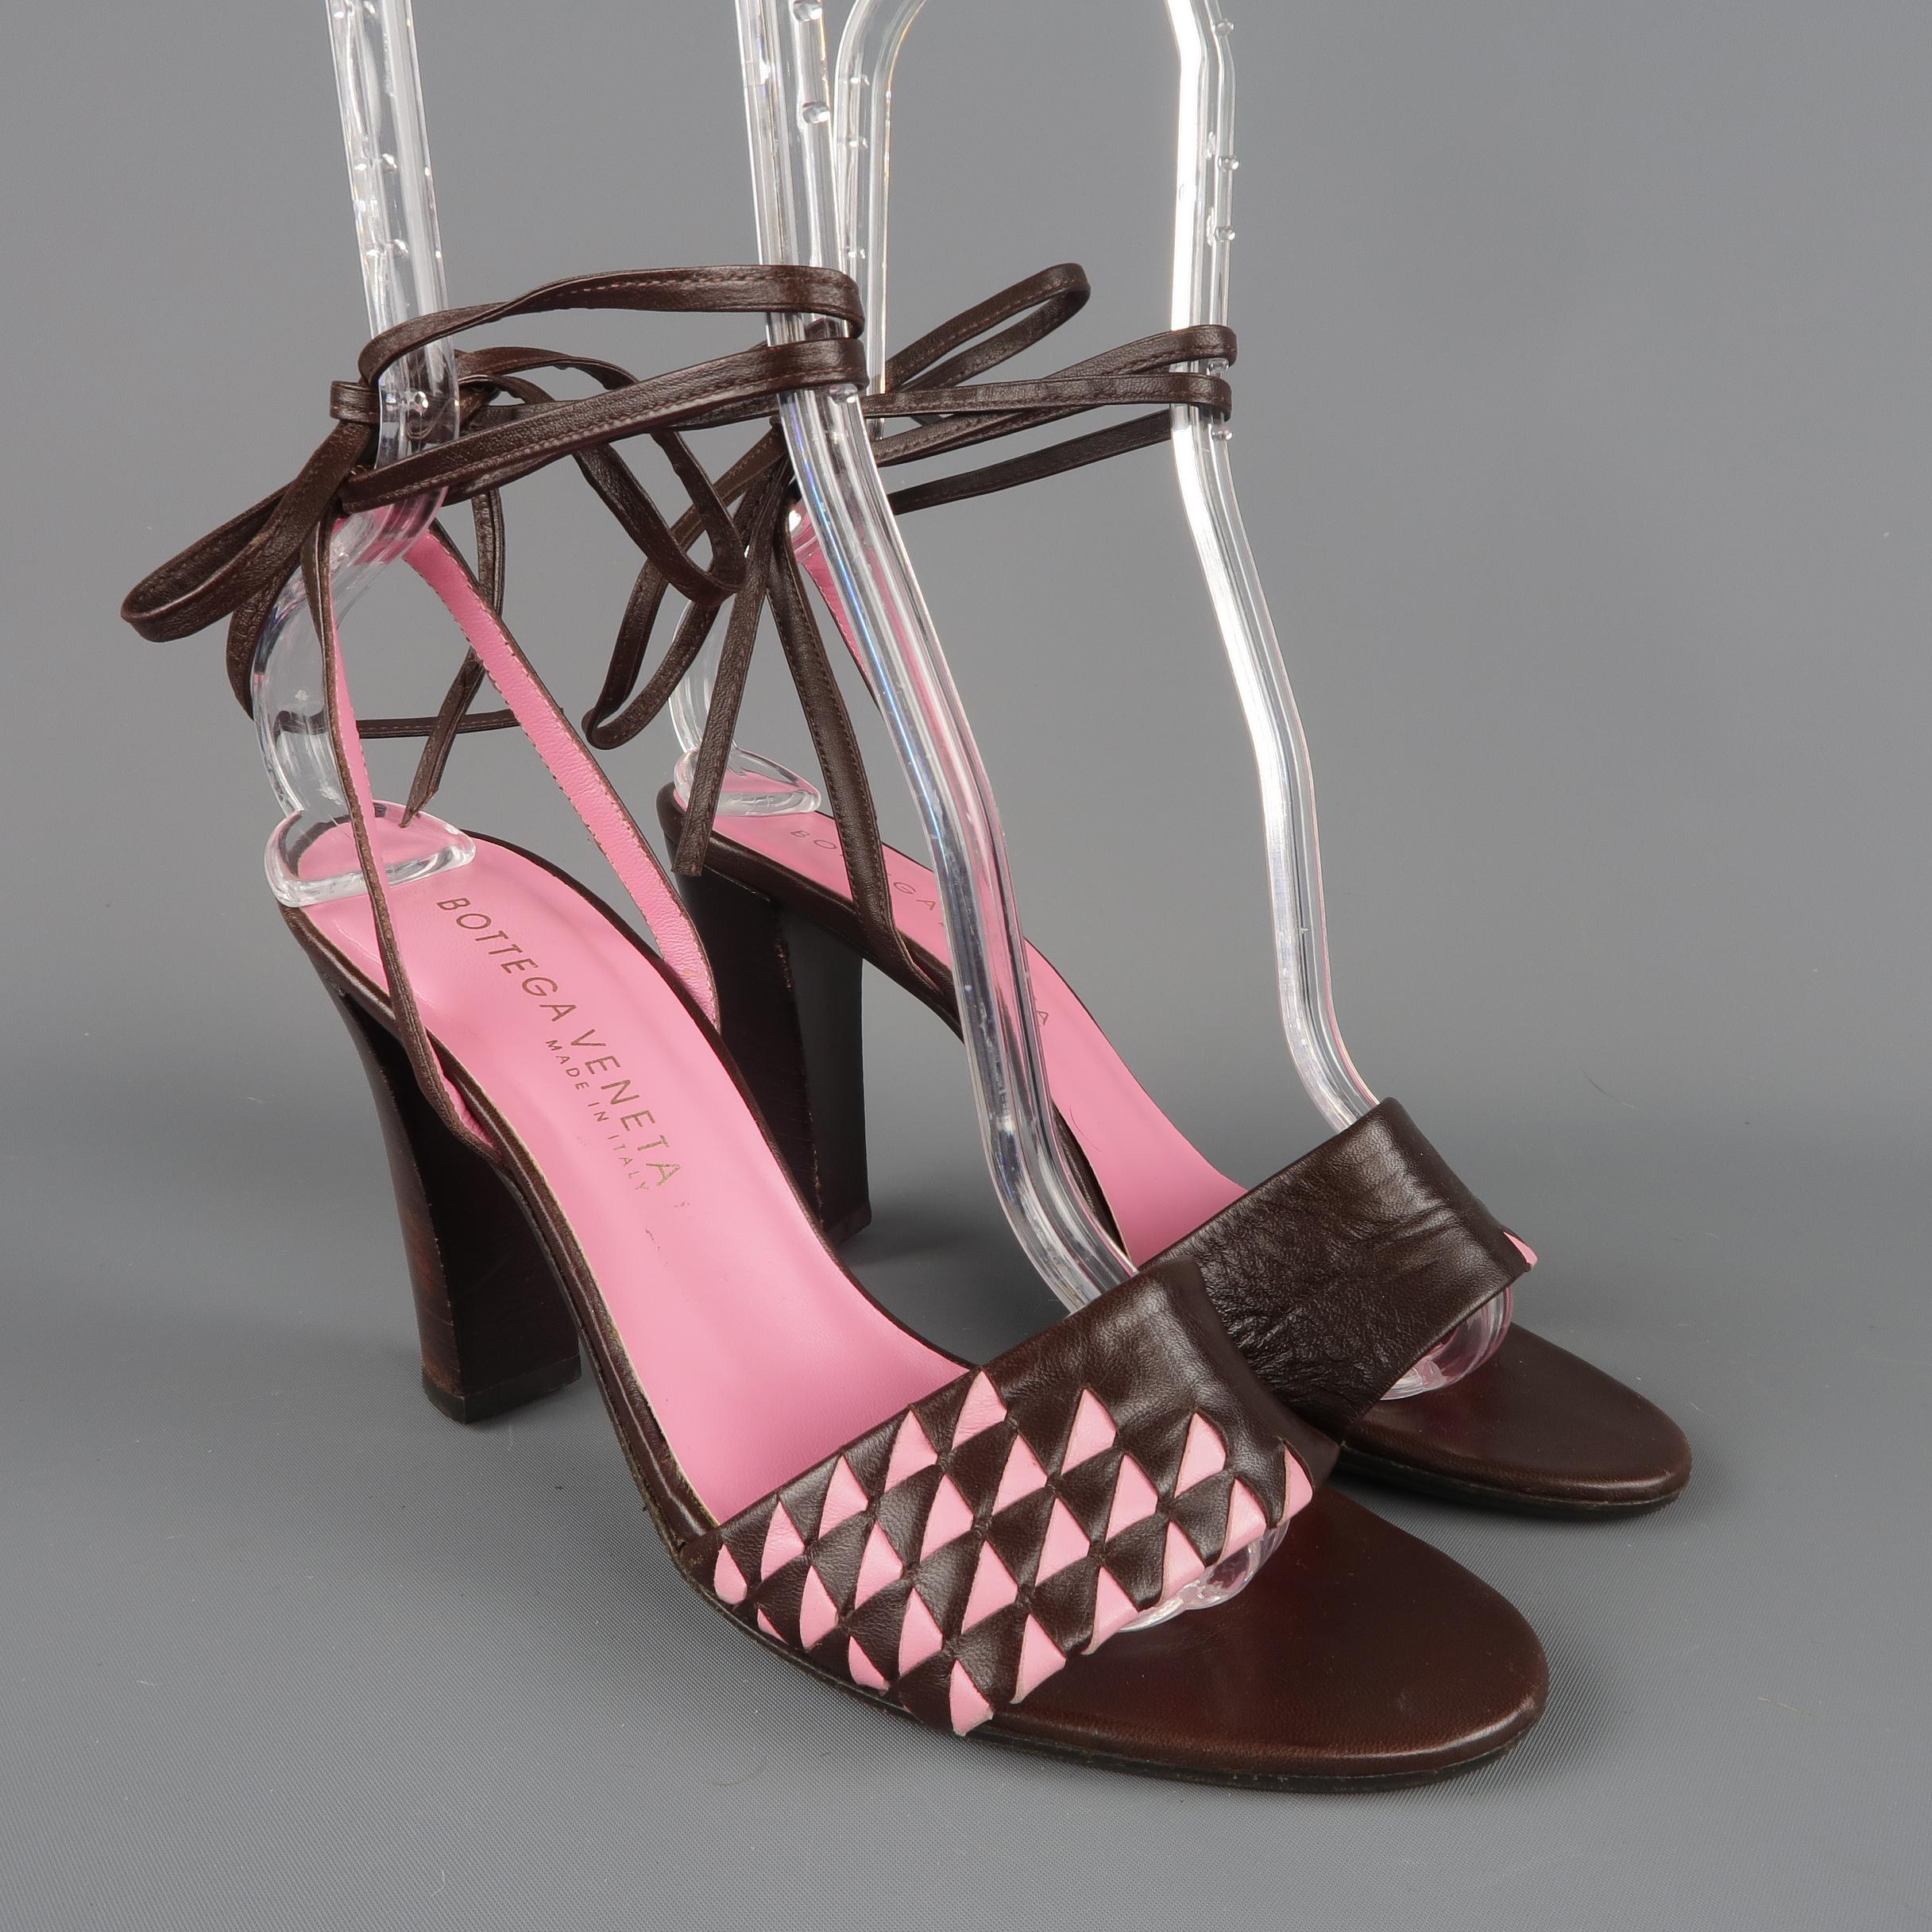 BOTTEGA VENETA sandals come in brown leather with a thick pink details toe strap, tied ankle strap, and chunky stacked heel. Resoled.Good Pre-Owned Condition.
Marked: IT 37
Measurements:
Heel: 3.75 in.